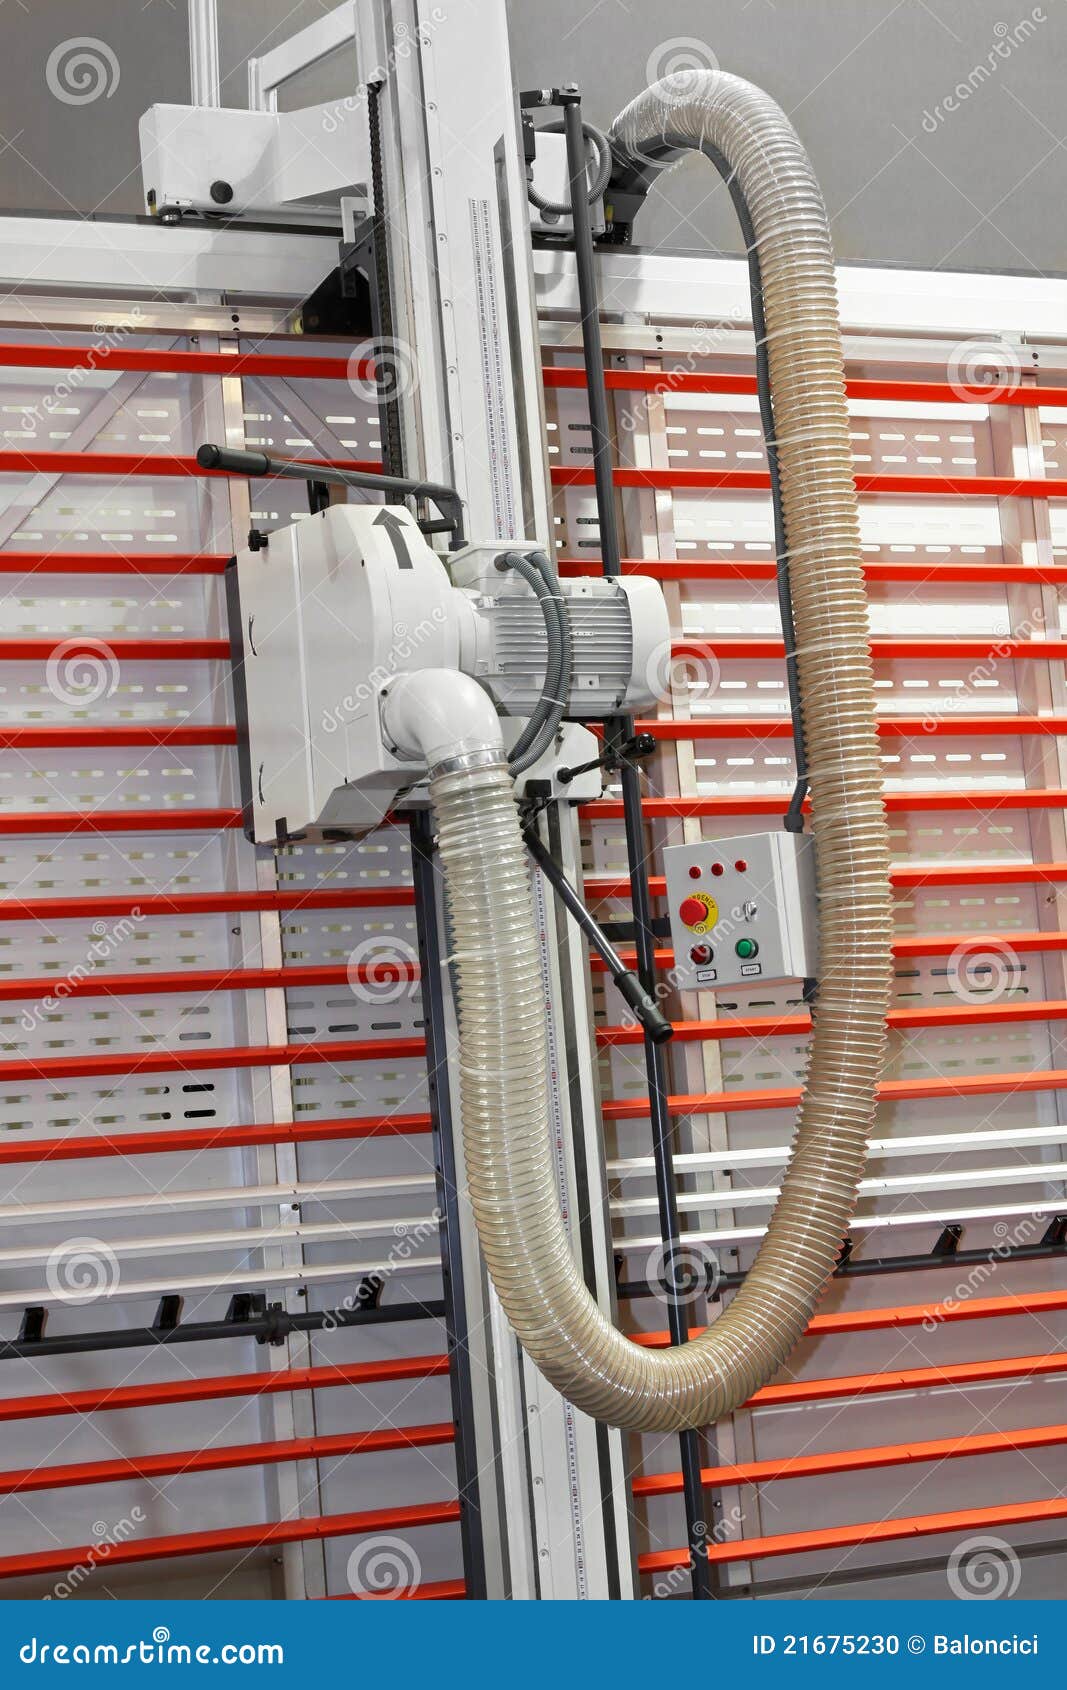 More similar stock images of ` Vertical panel saw `